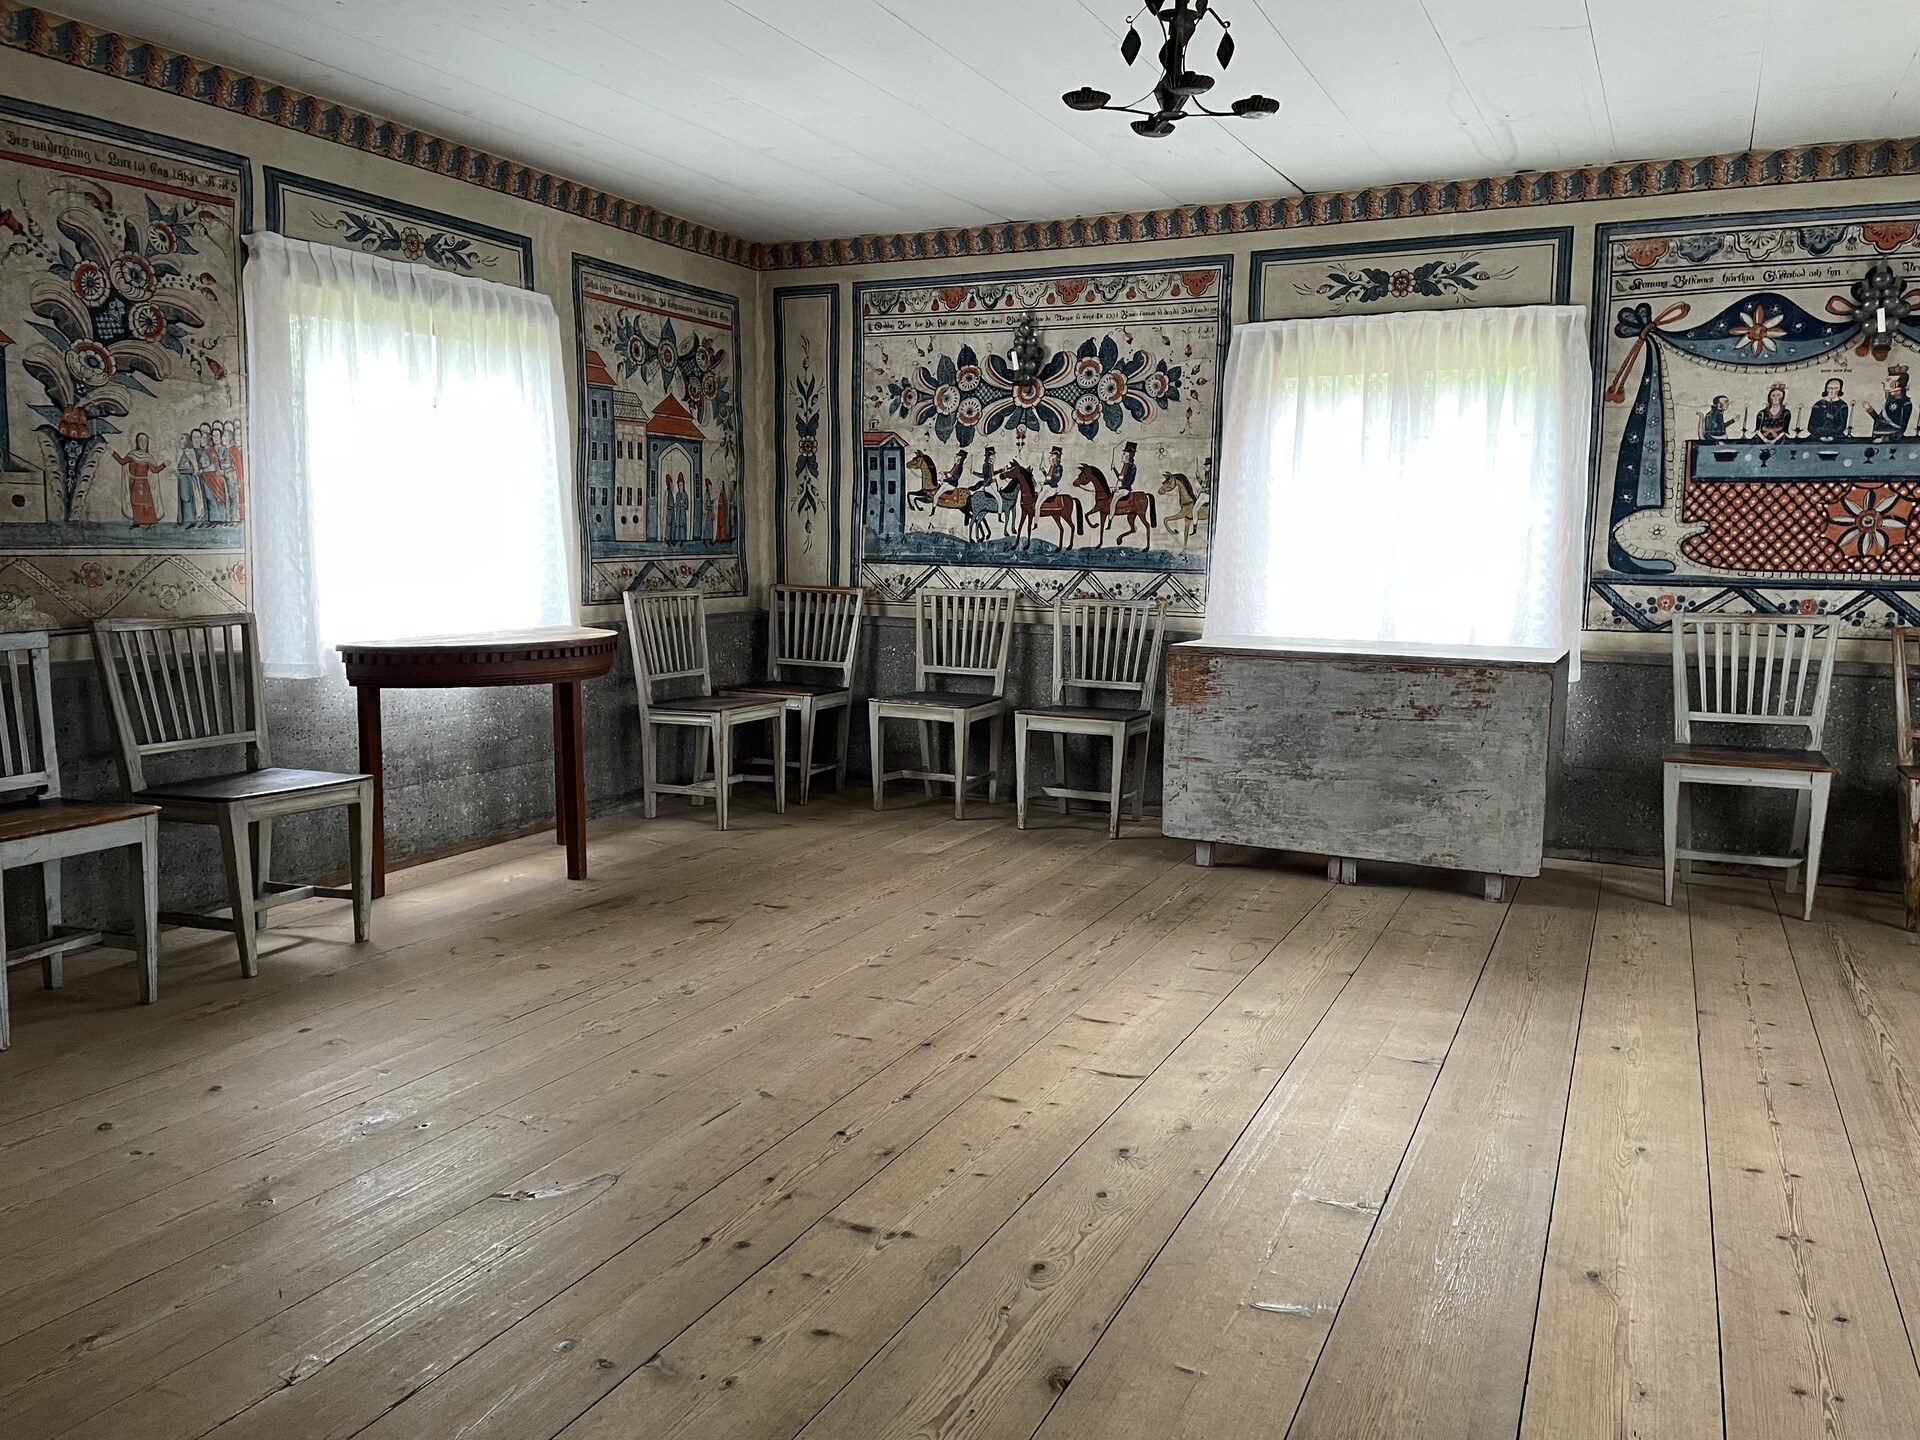 The interior of a traditional Swedish countryside farmhouse